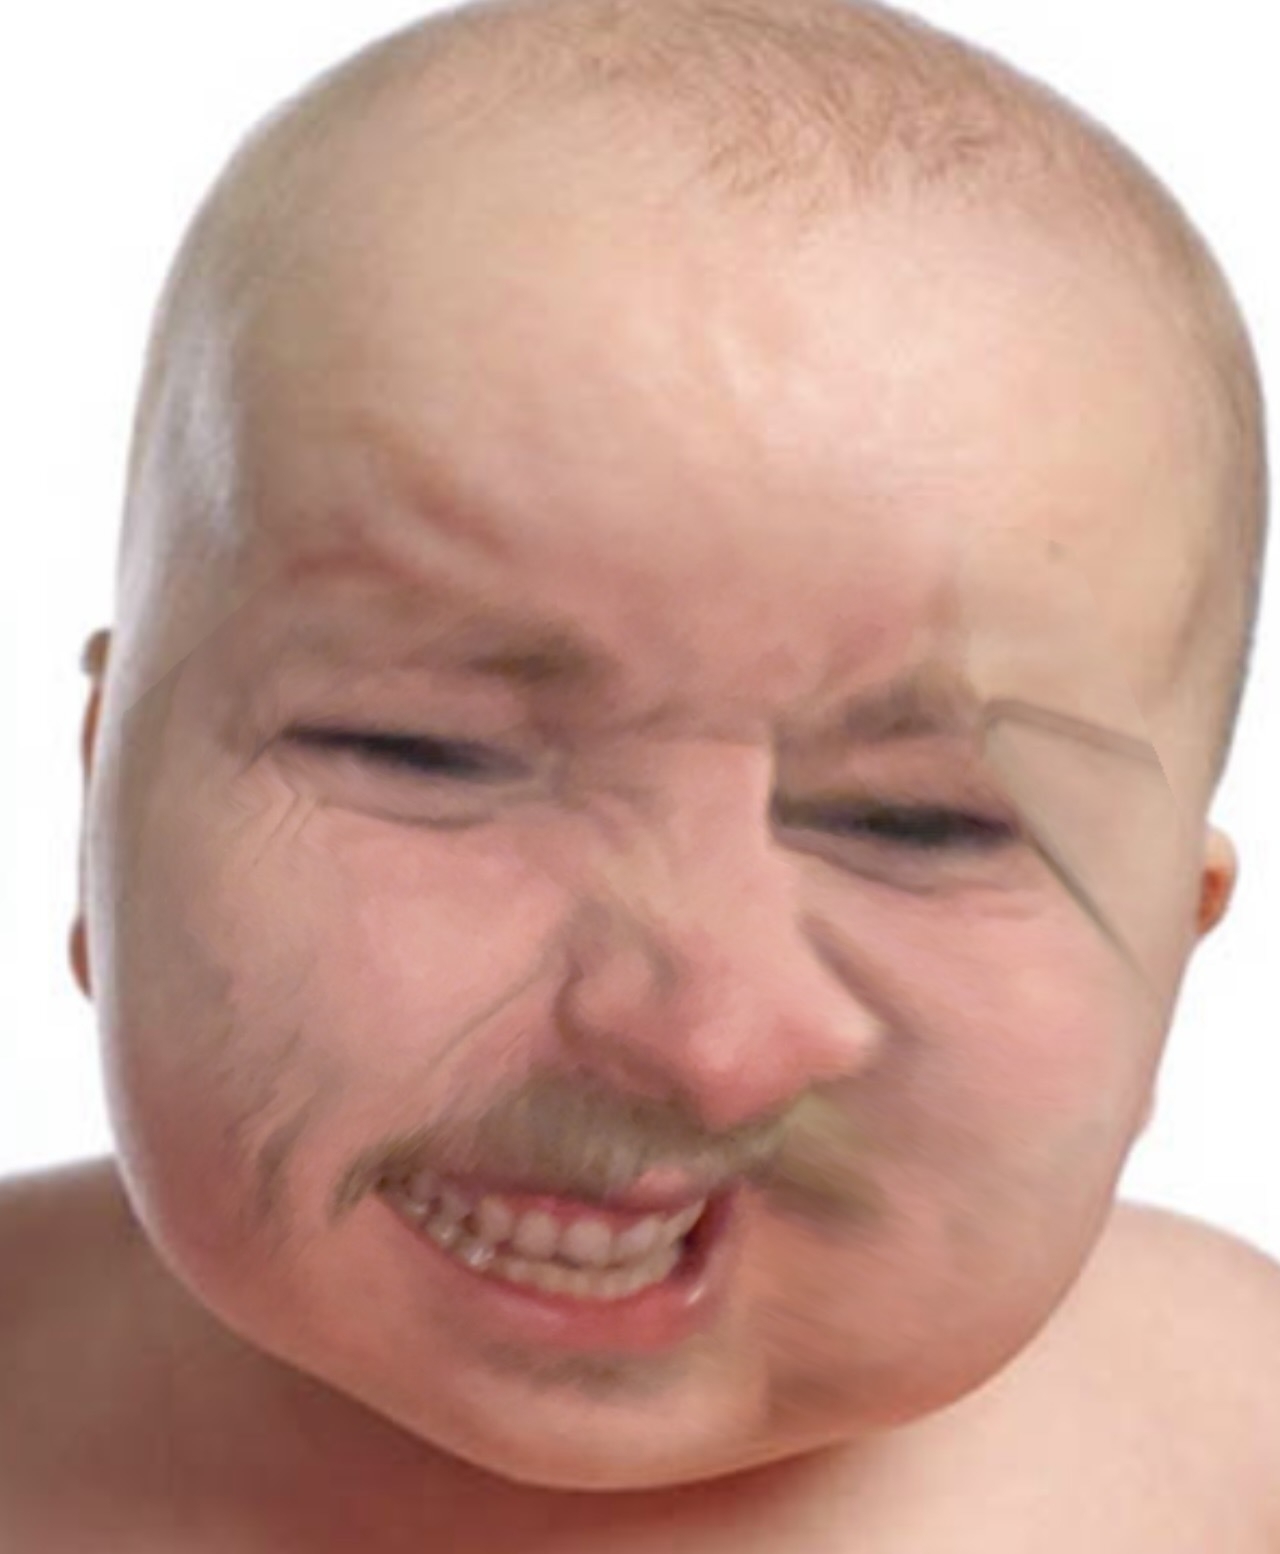 An ugly, AI-manipulated photo of a  man&#39;s face transformed into a baby&#39;s face